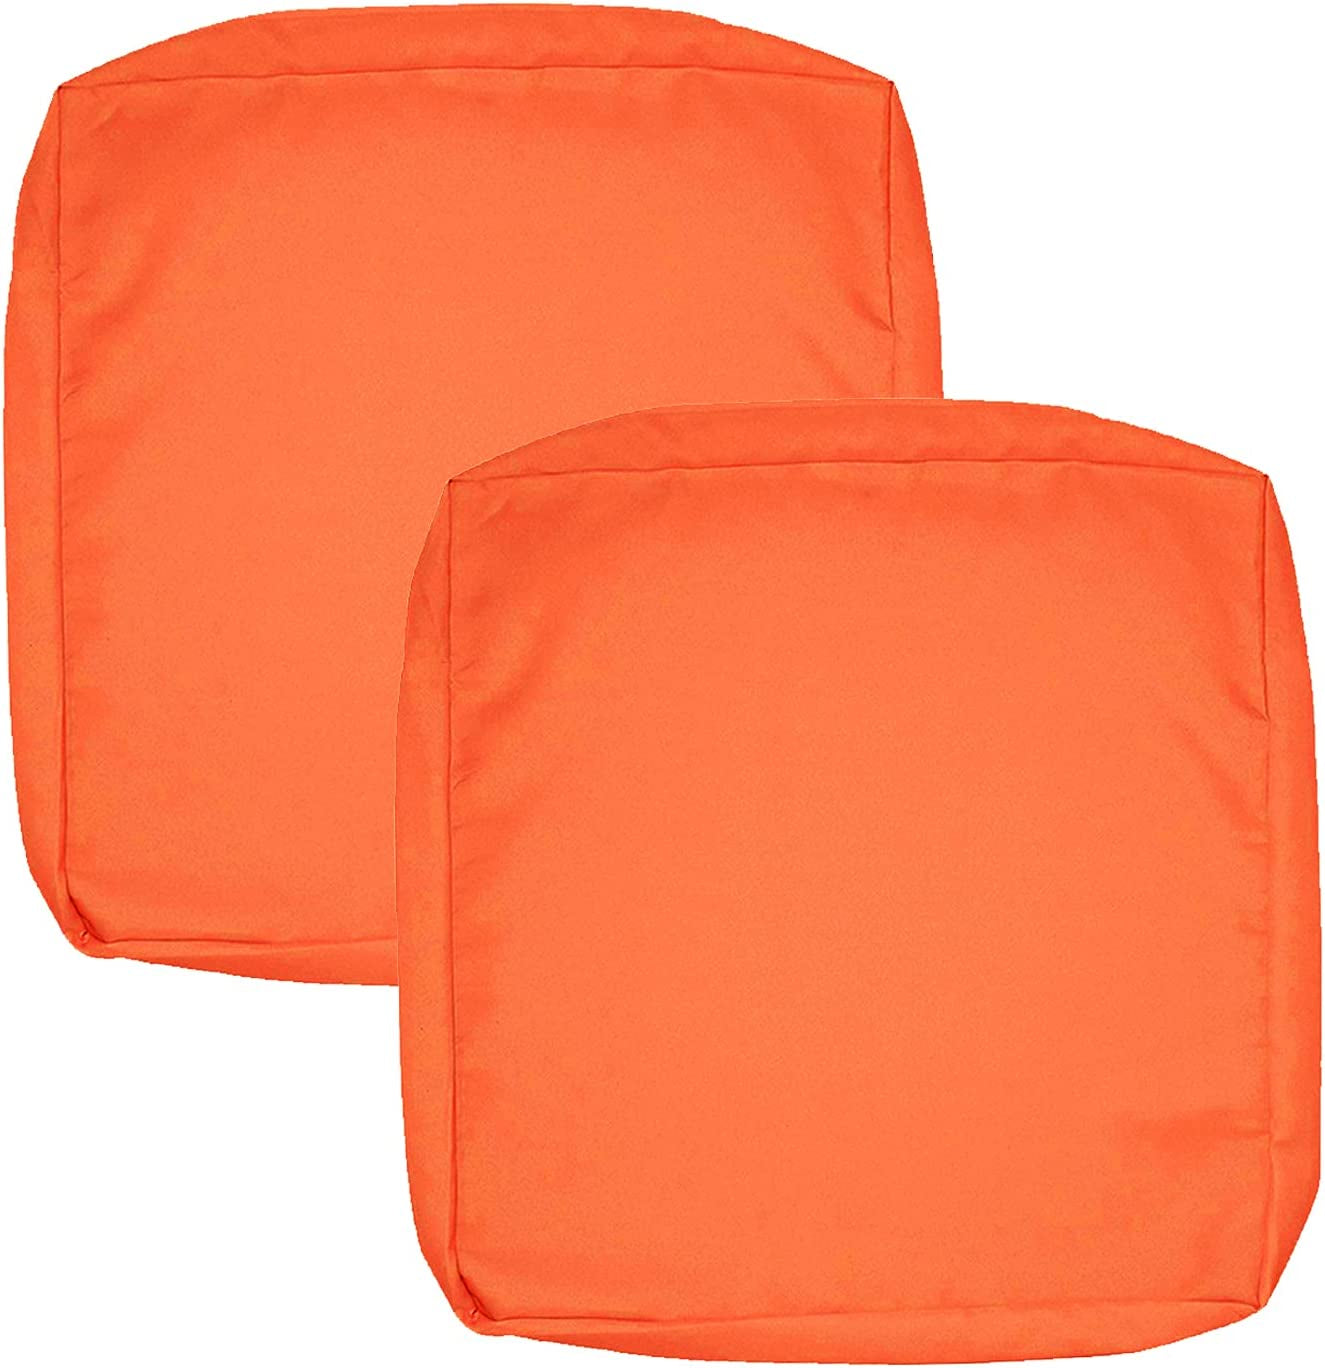 FLYMEI, FLYMEI Outdoor Cushion Covers, Replacement Patio Cushion Covers 24 X 24 X 4 Inch, Orange Water Resistant Cushion Pillow Seat Covers, Patio Loveseat Covers Only Patio Cushion Slip Covers